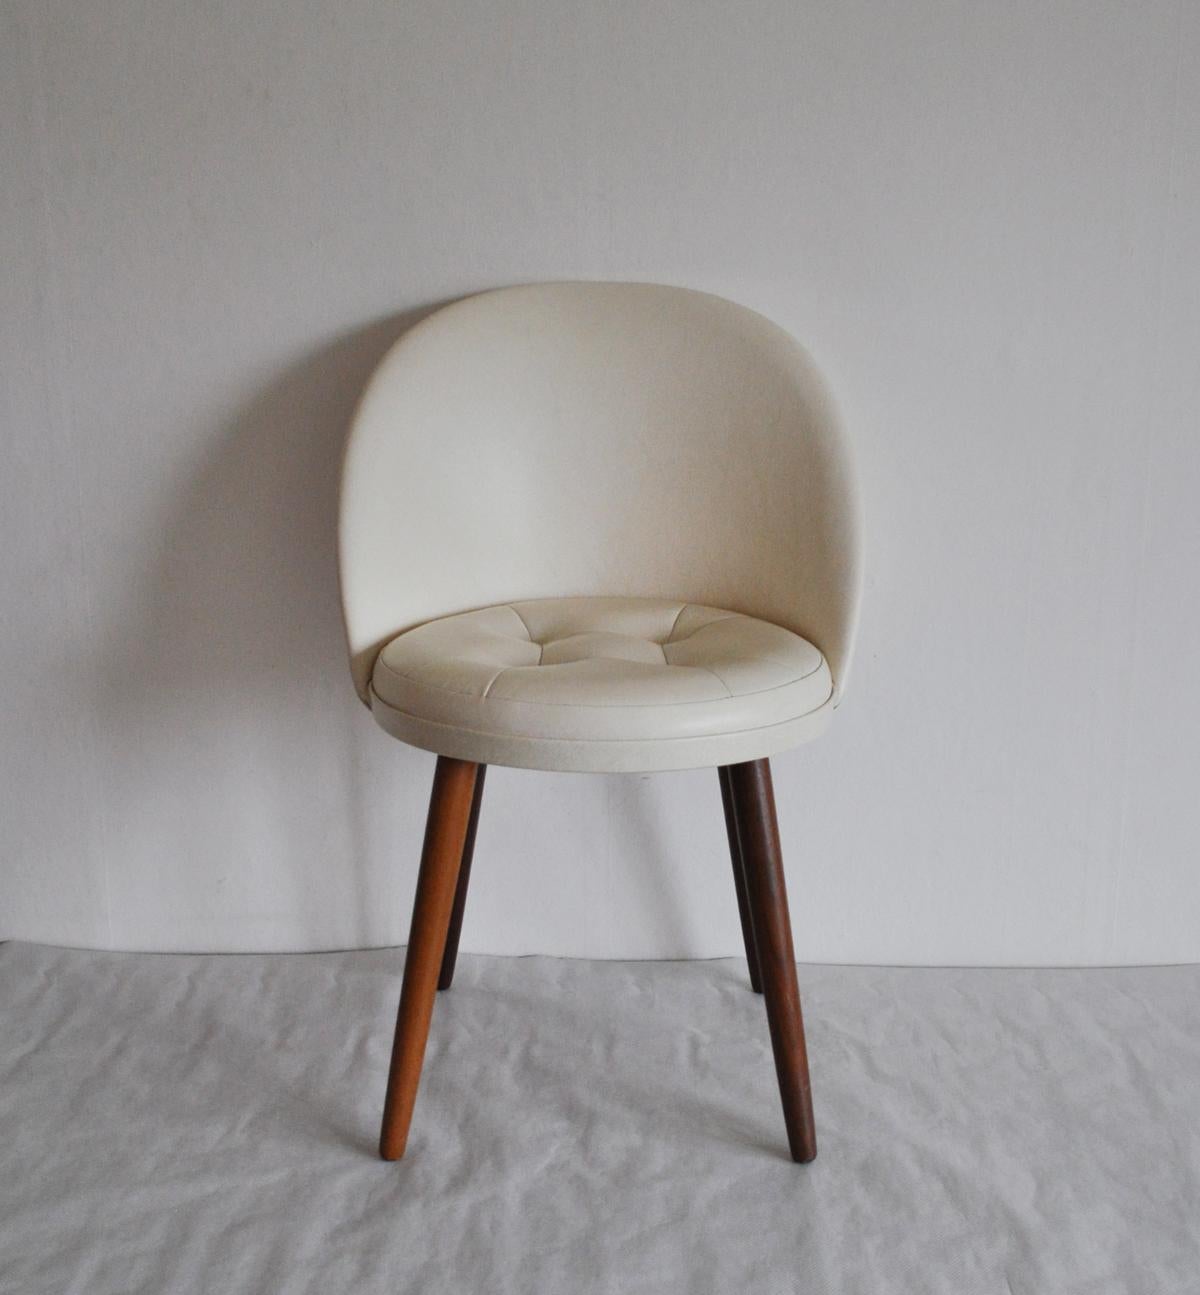 Elegant Scandinavian vanity chair designed in the 1950s.
The chair is mounted on tapering teak legs. Seat and back upholstered with artificial skin.
Measures: Seat height: 41 cm
Patinated with signs of wear consistent with age and use.